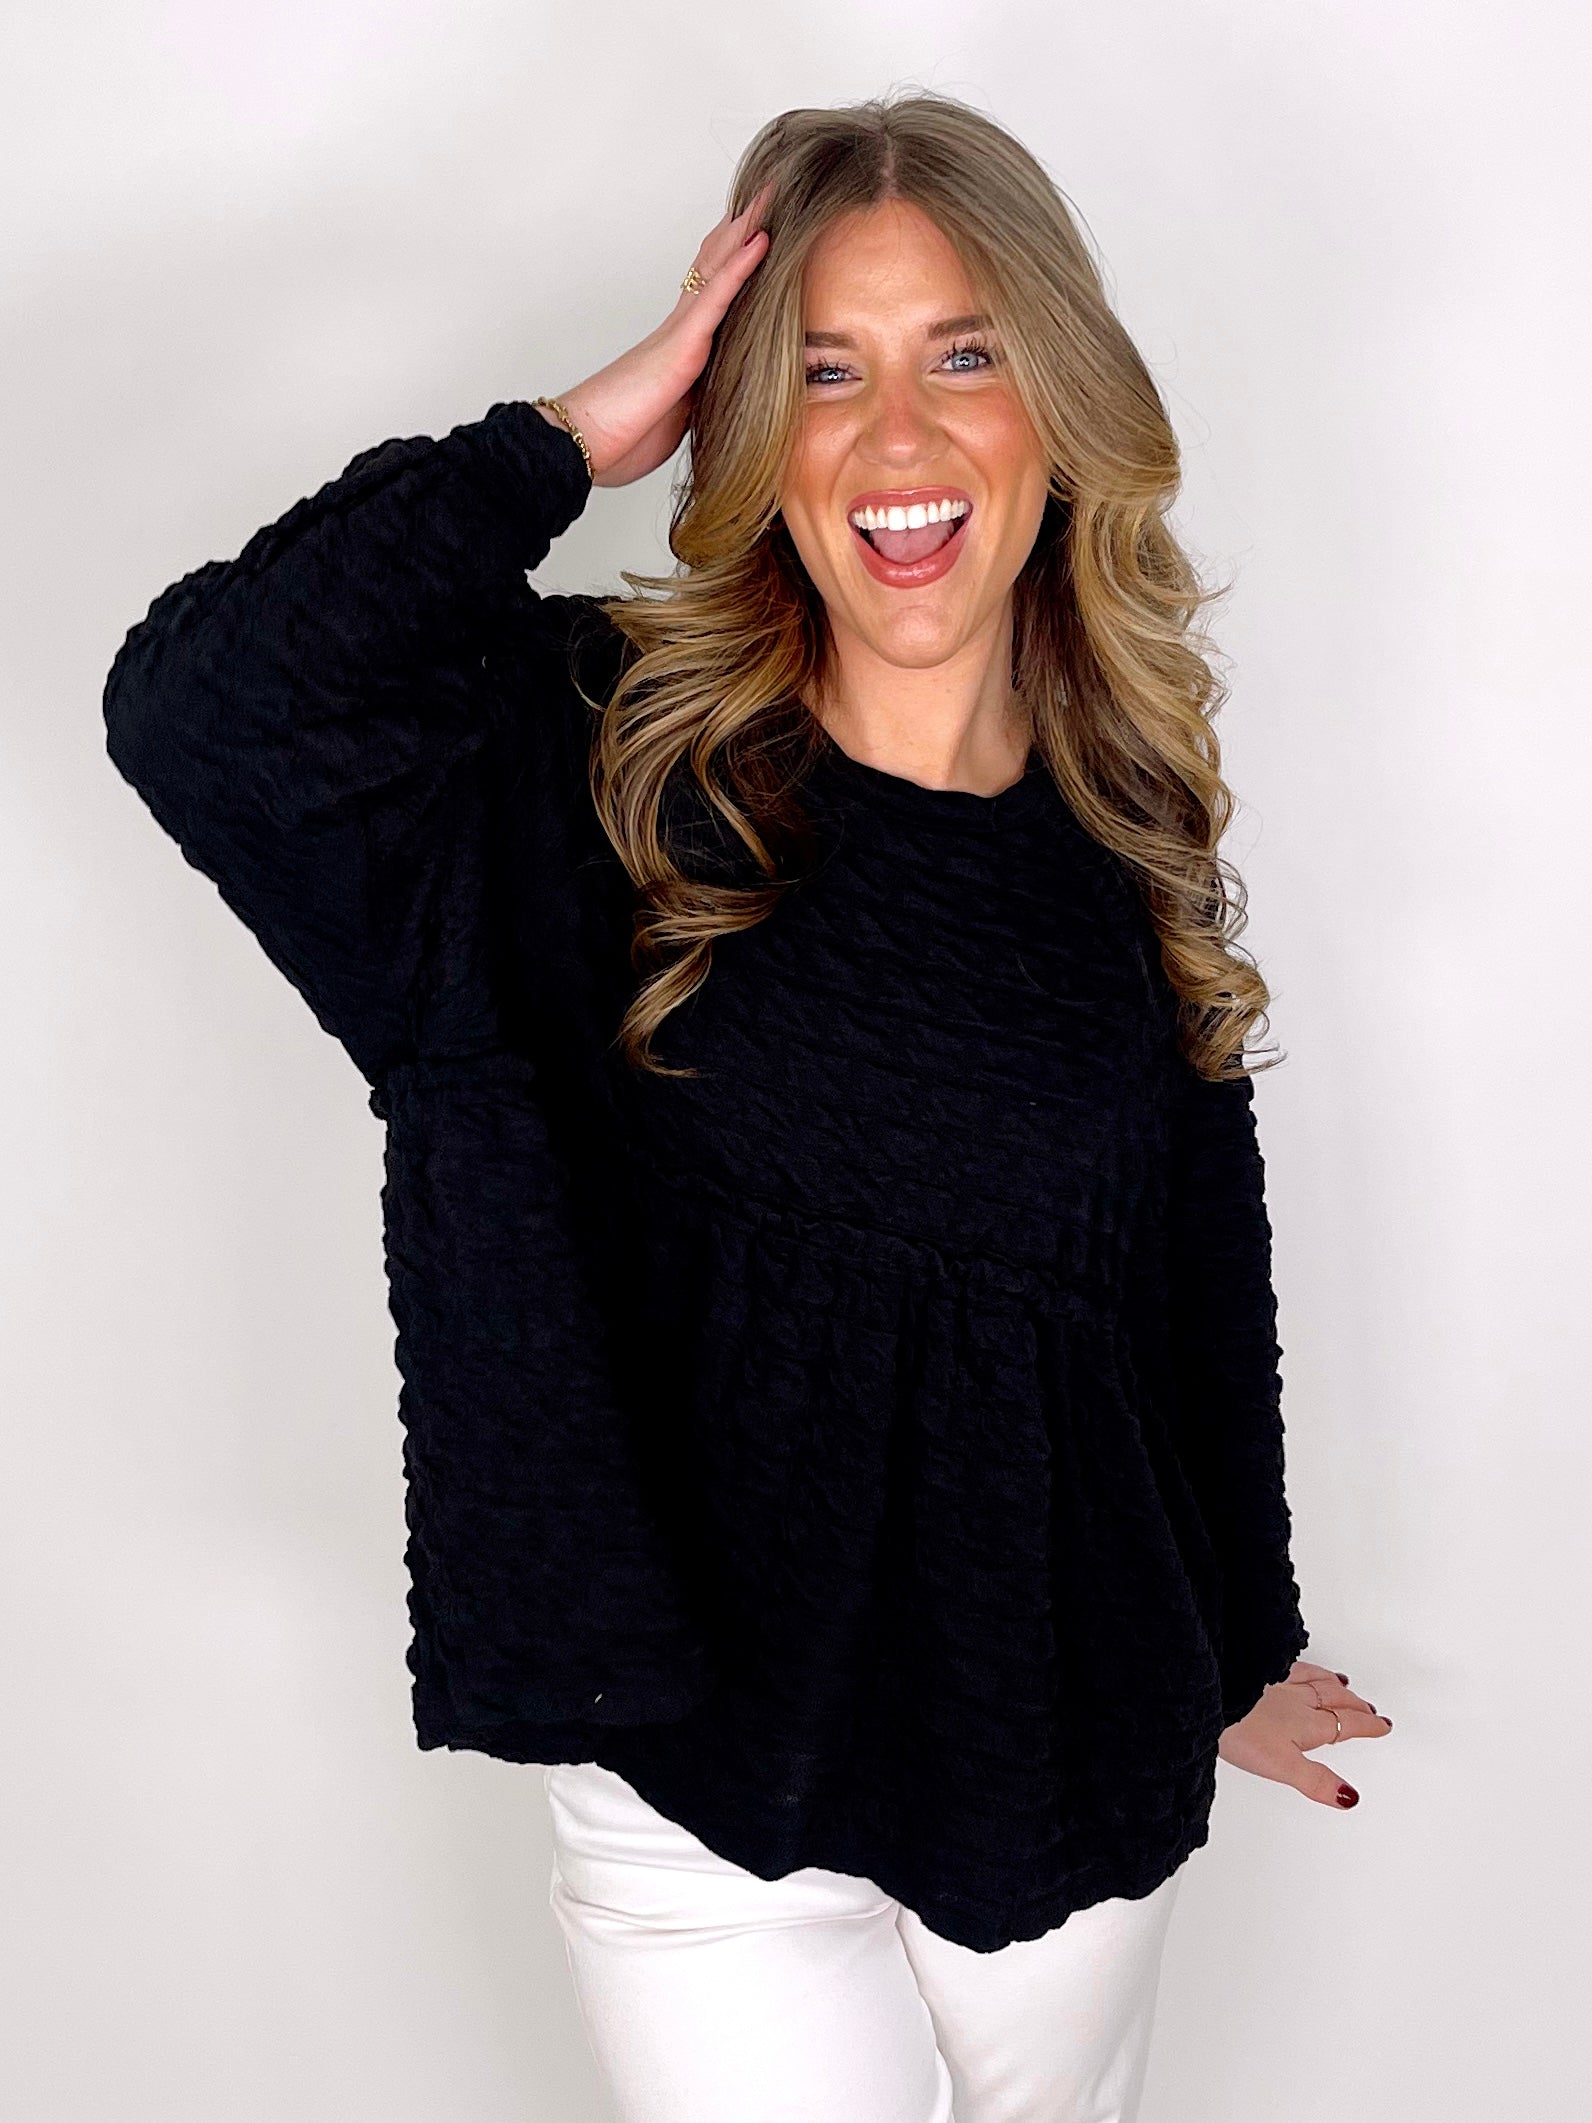 The Channing Top-Long Sleeves-Anniewear-The Village Shoppe, Women’s Fashion Boutique, Shop Online and In Store - Located in Muscle Shoals, AL.